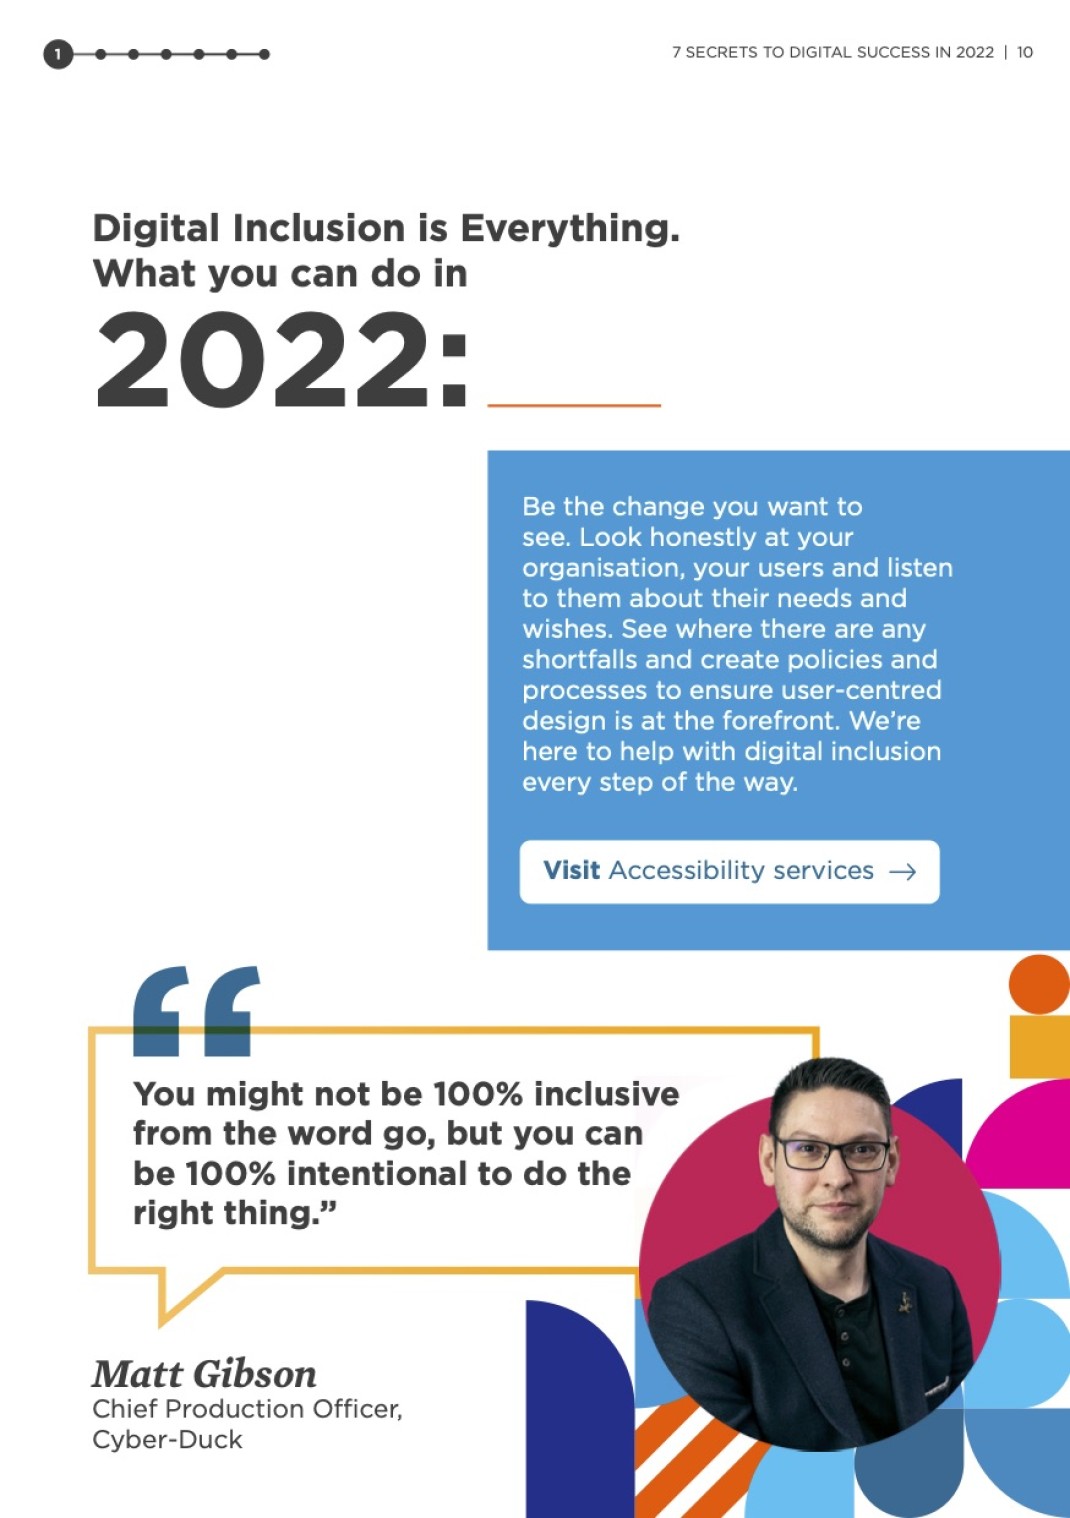 Inside Page from 7 Digital Secrets White Paper on Digital Inclusion in 2022